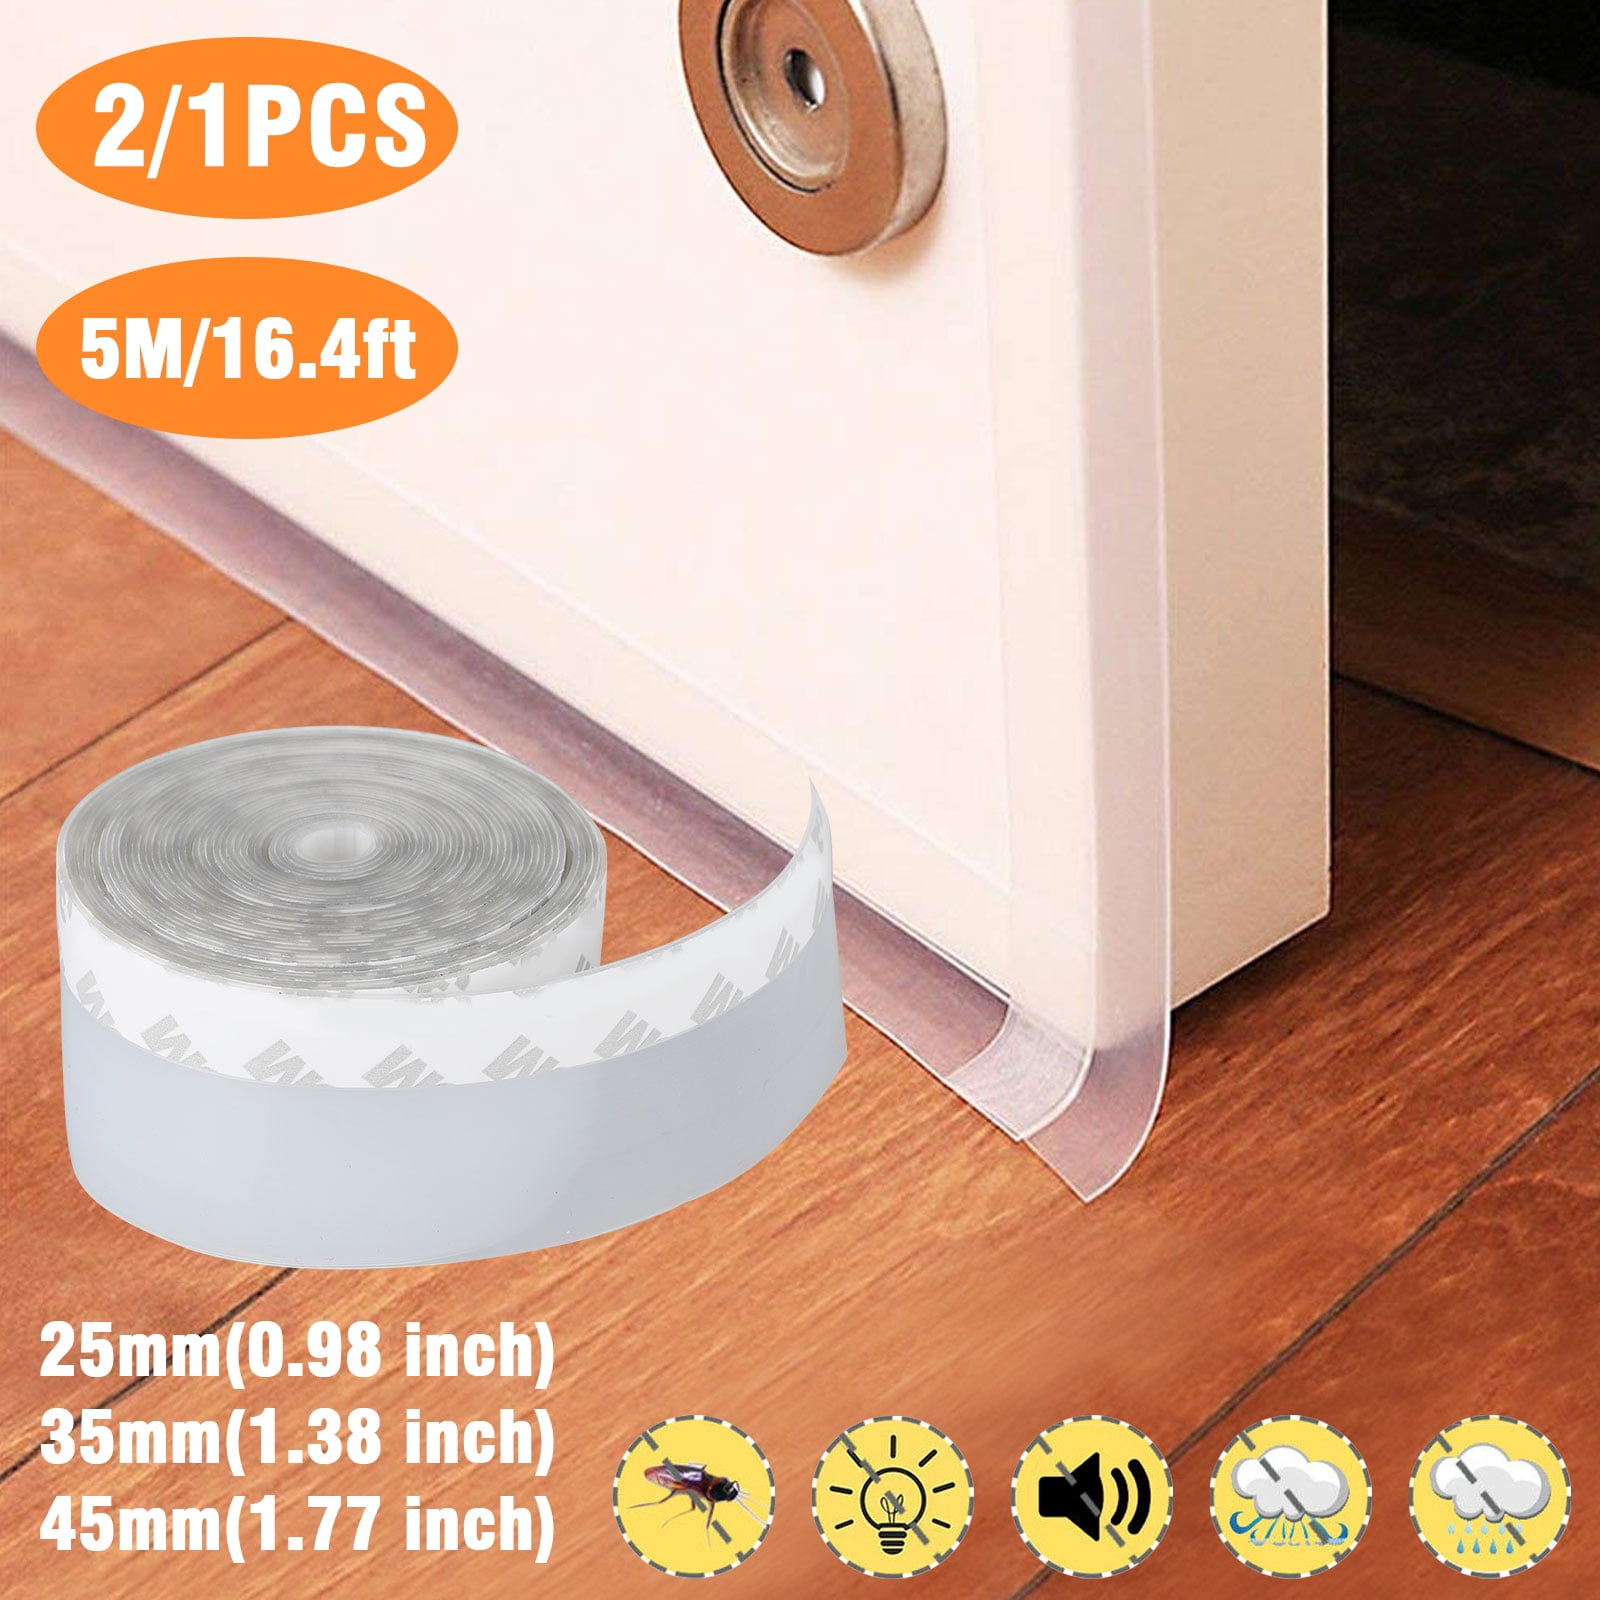 EEEkit 2/1 Roll Weather Stripping Silicone Seal Strip, Silicone Door  Weather Seal Bottom Strip, Self Adhesive Noise Stopper Tape Seal for Window  Door